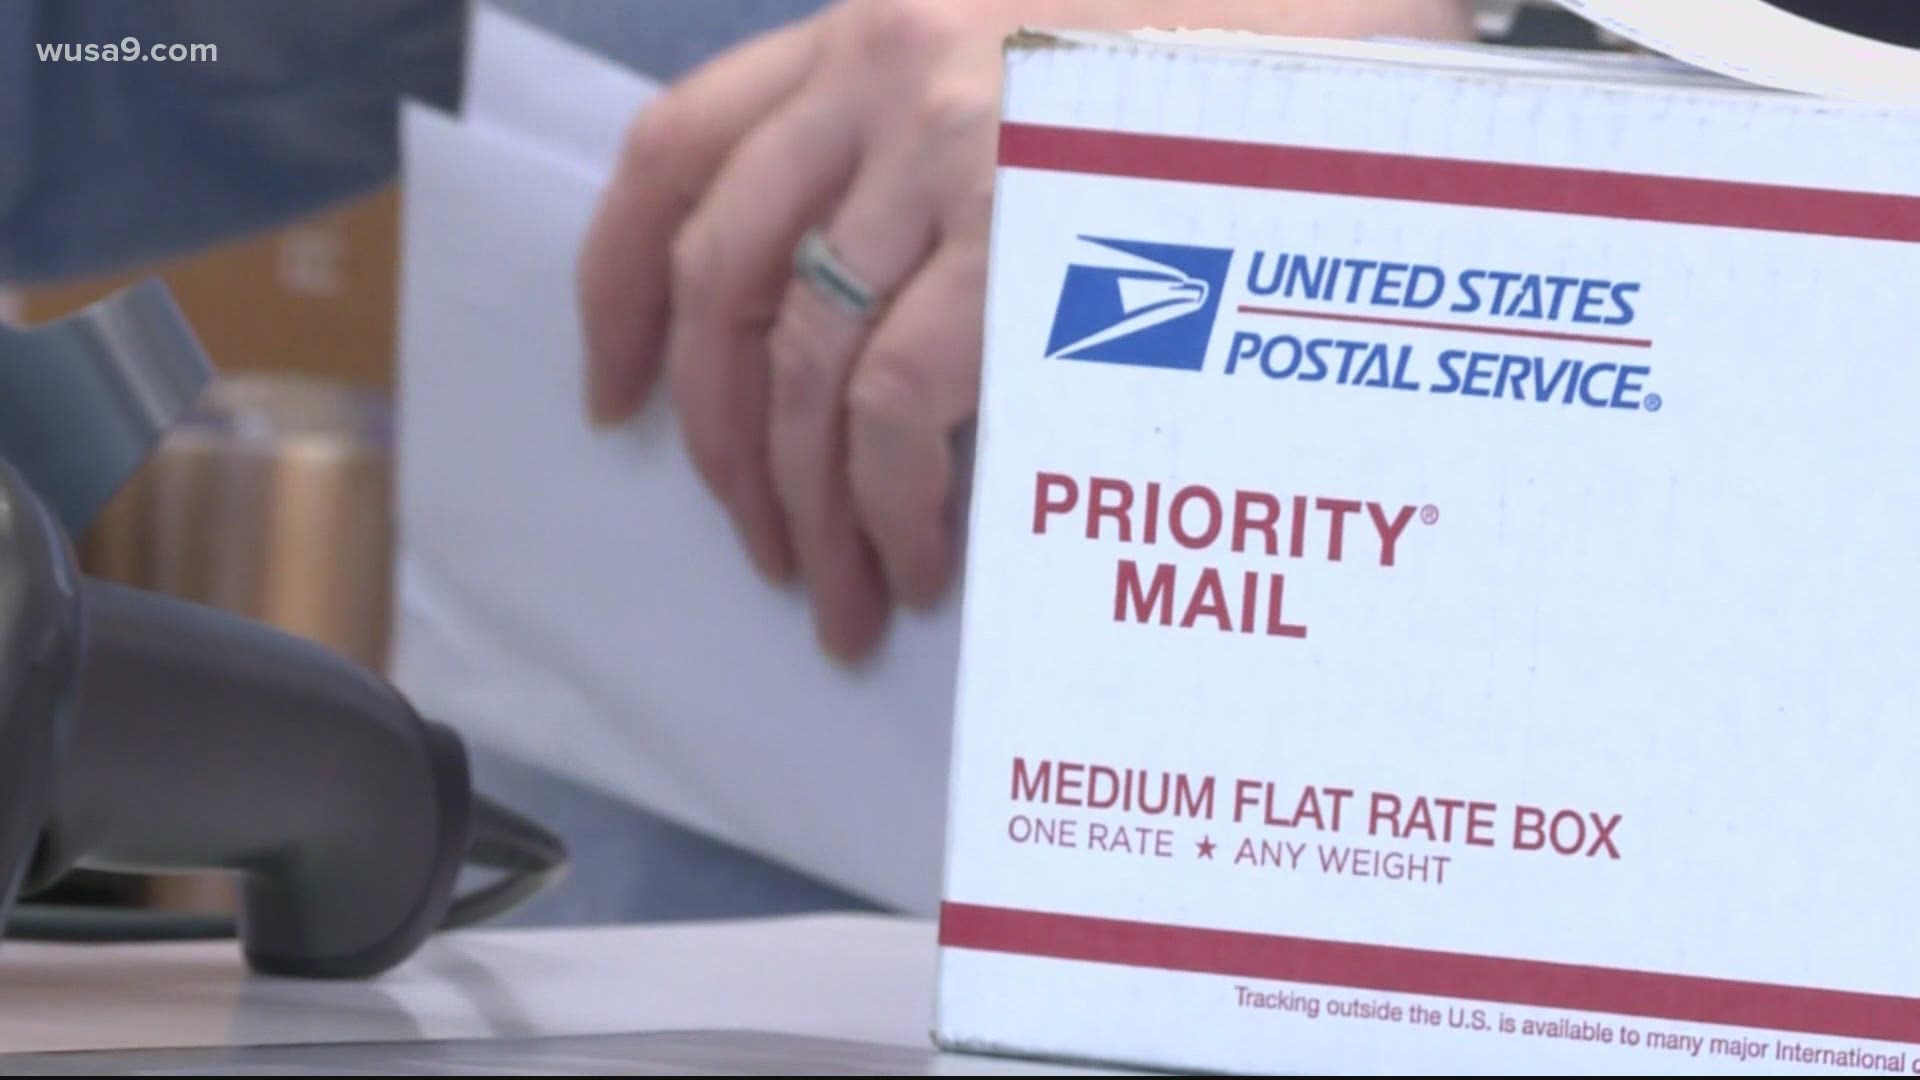 USPS data showed the week of Dec. 5, only 64% of first class mail delivered in DC arrived on time.